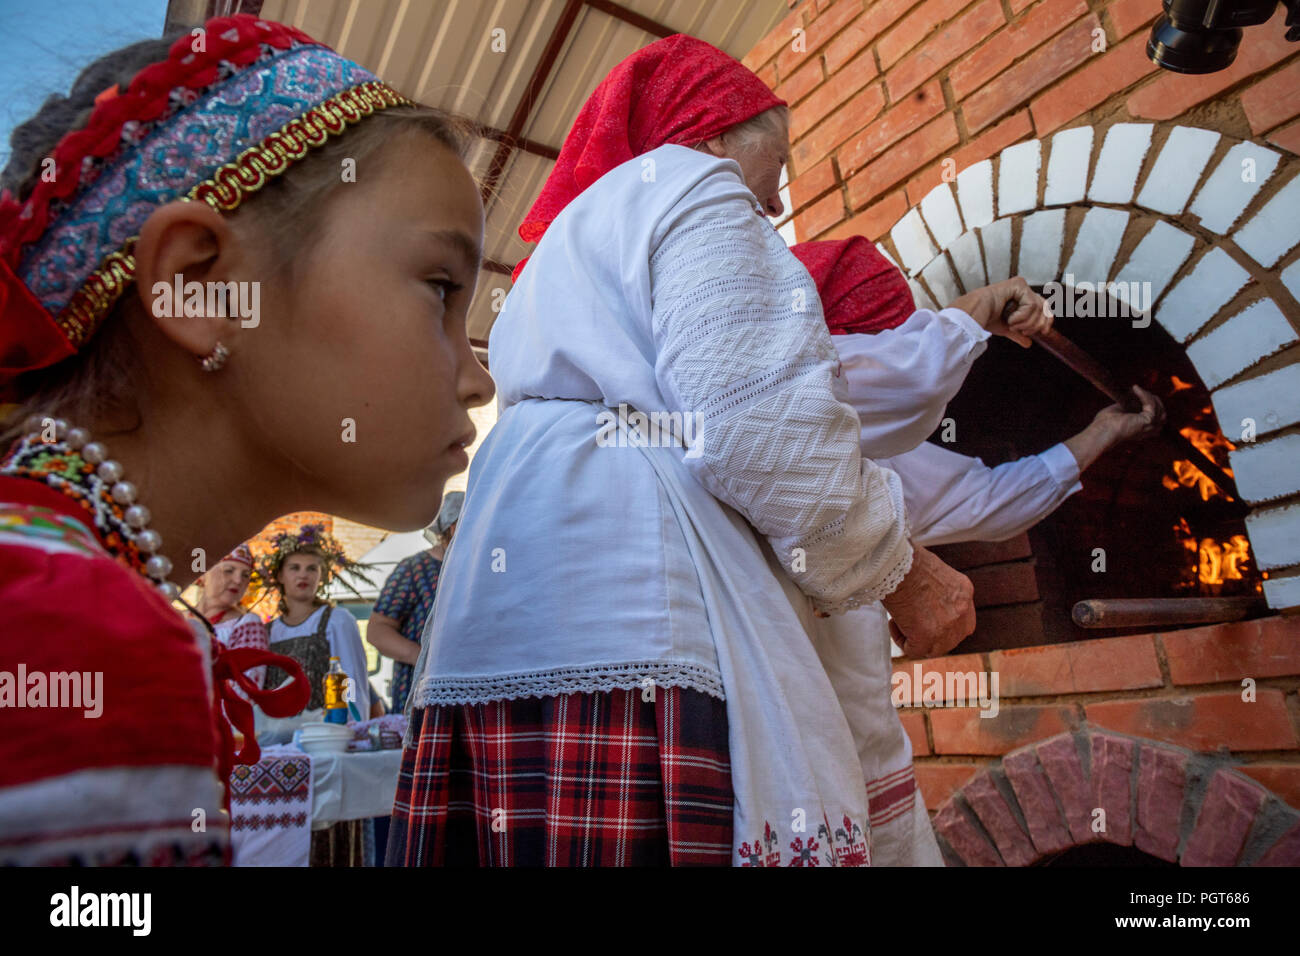 A girl watches baked pancakes in an oven according to old Russian tradition in village of Tambov region, Russia Stock Photo